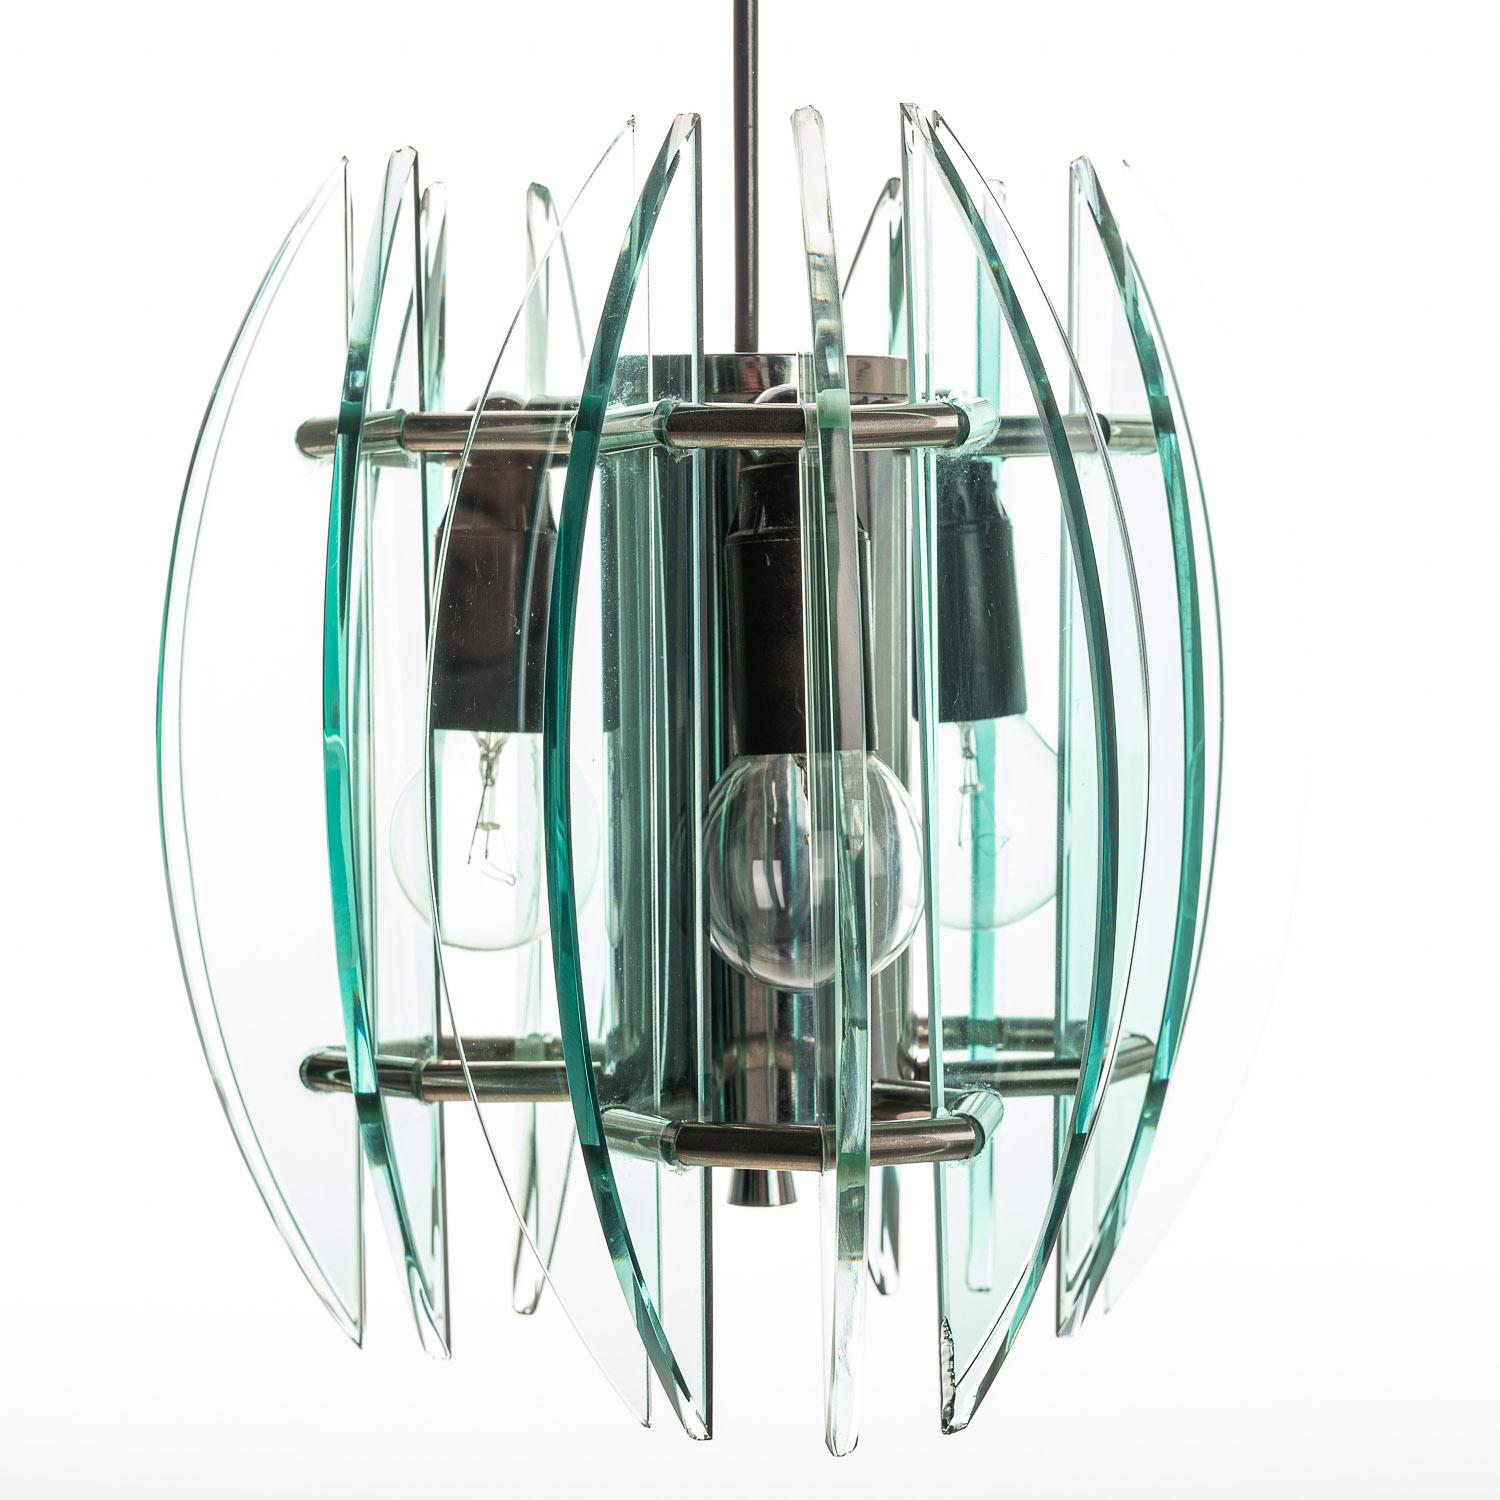 This stylish lamp is made with arc-shaped glass panels surrounding three E14 sized bulbs. The alternating thickness of the glass gives an extra edge to the design. Please note that some of the glass pieces have small chips around the edges, only